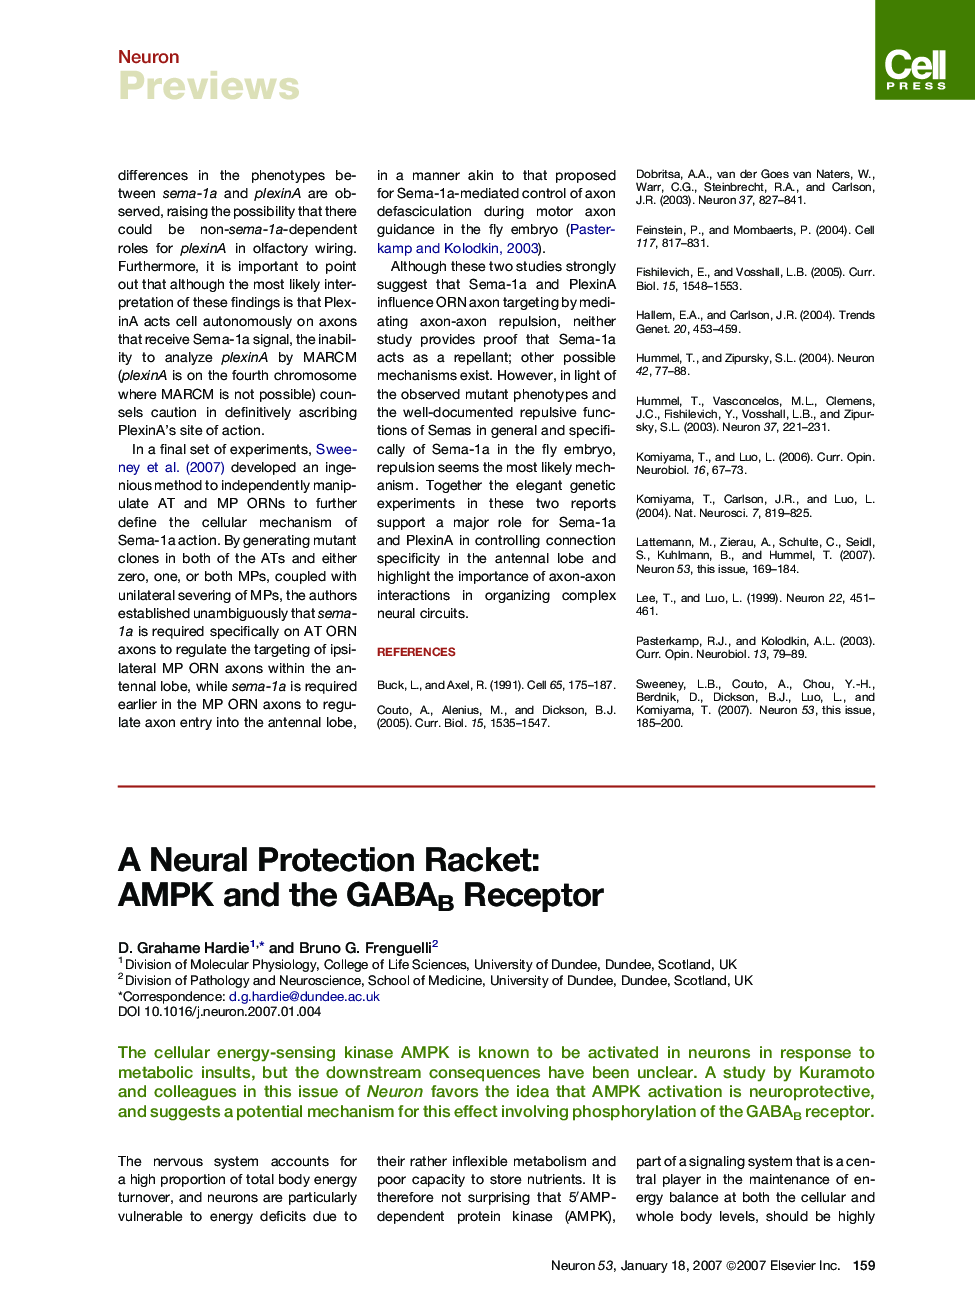 A Neural Protection Racket: AMPK and the GABAB Receptor